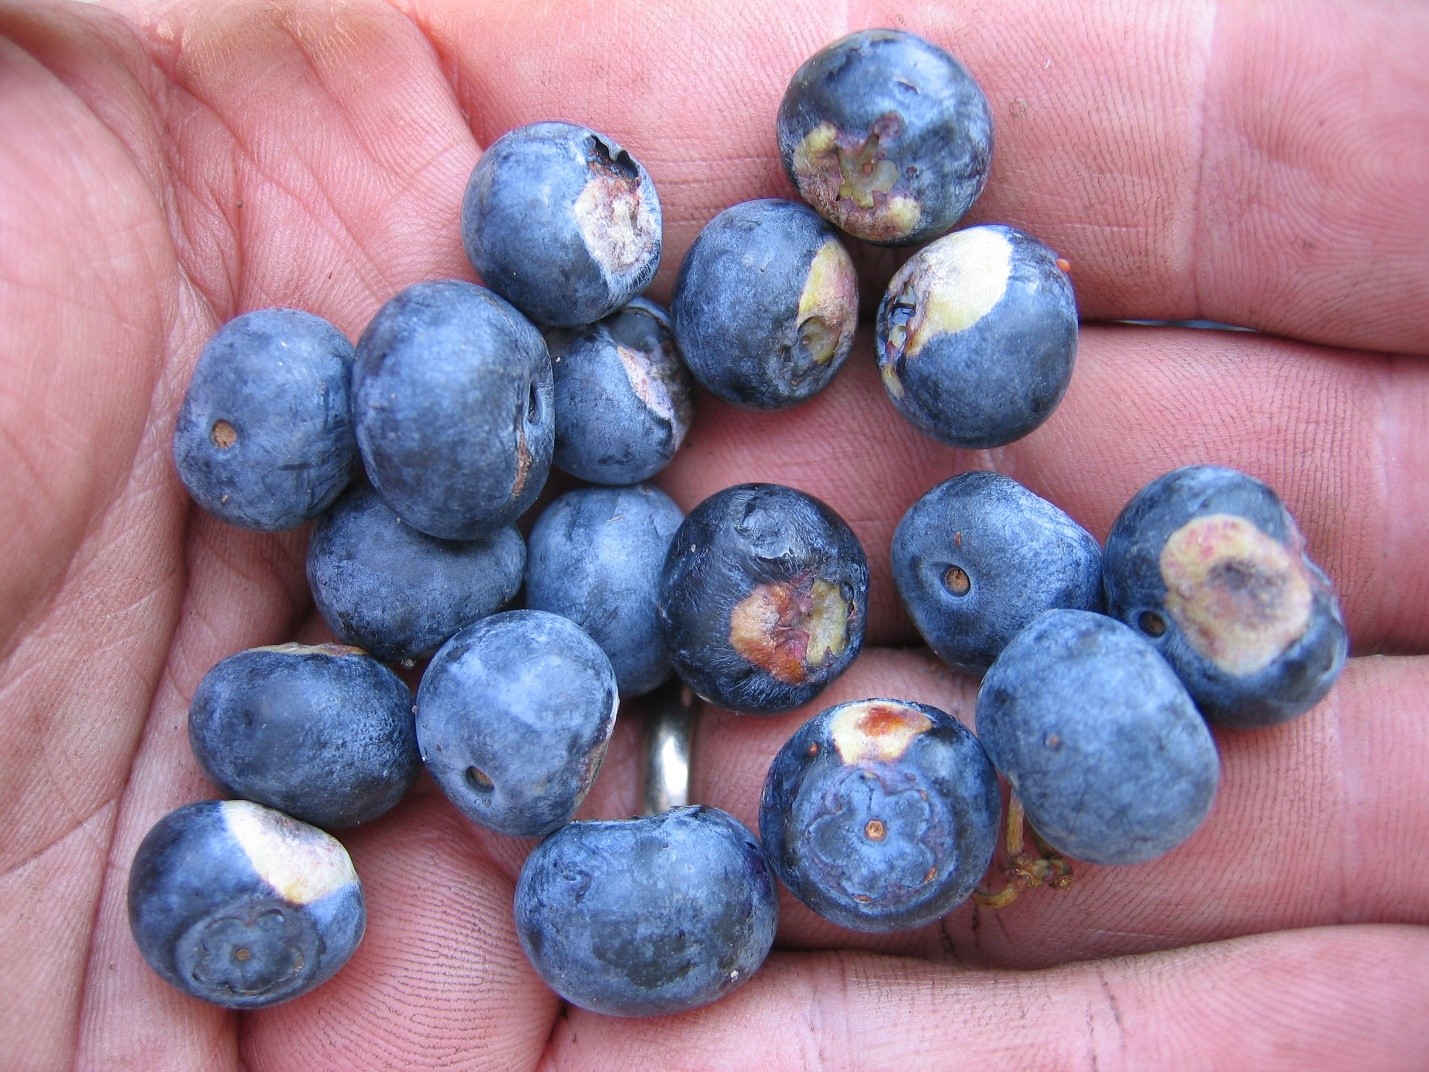 Blueberries in the palm of someone's hand, with large white spots on the fruit